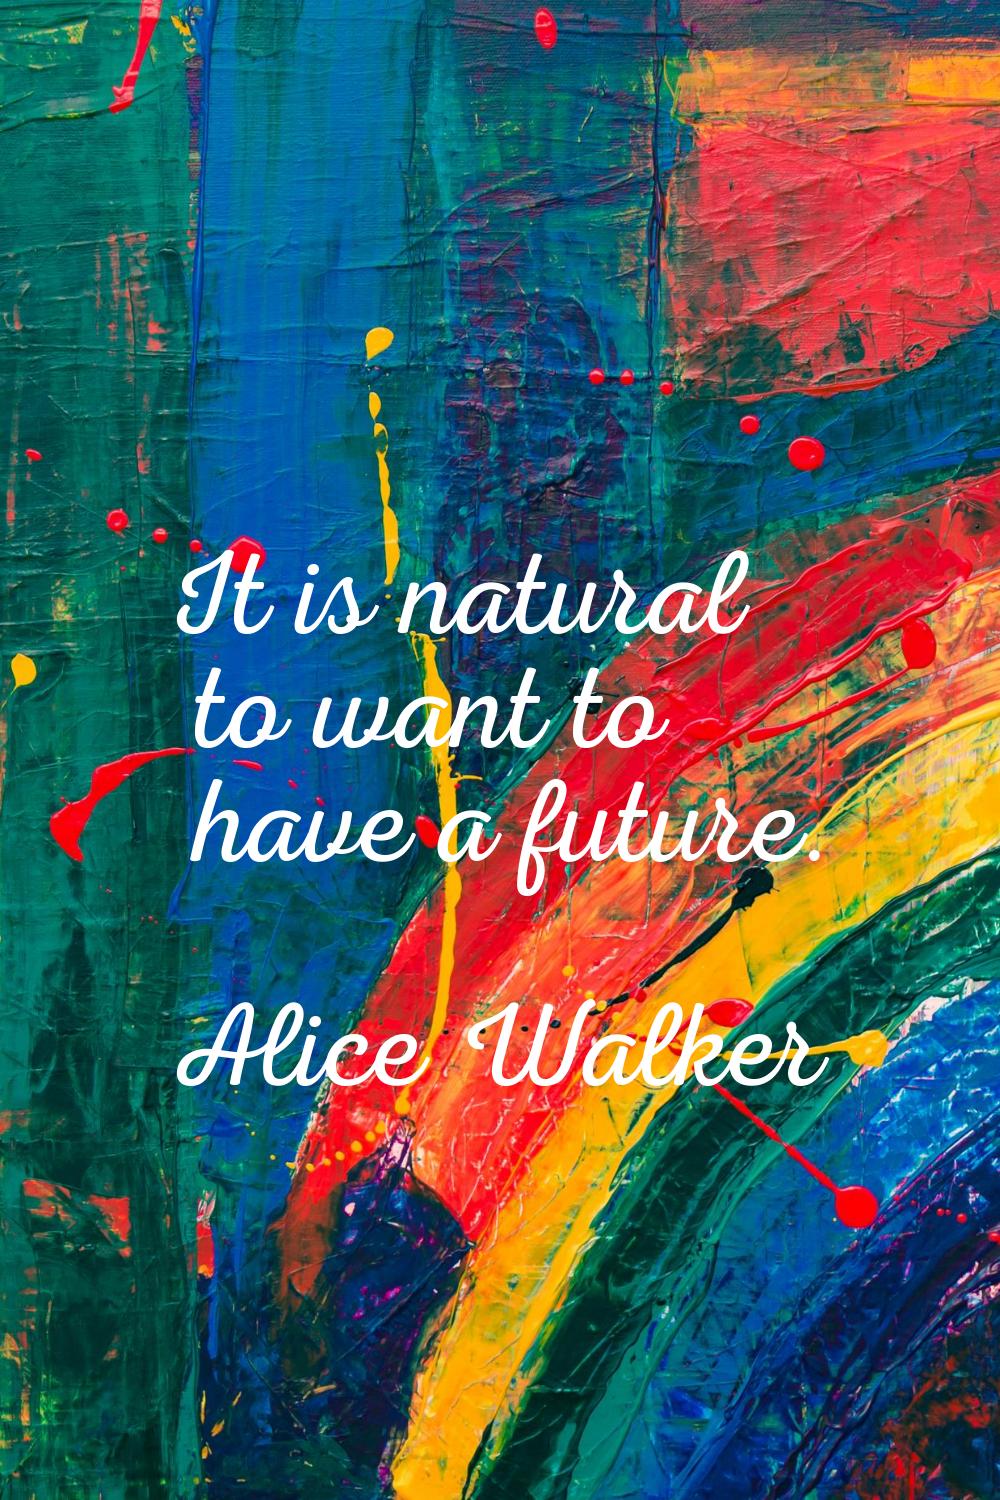 It is natural to want to have a future.